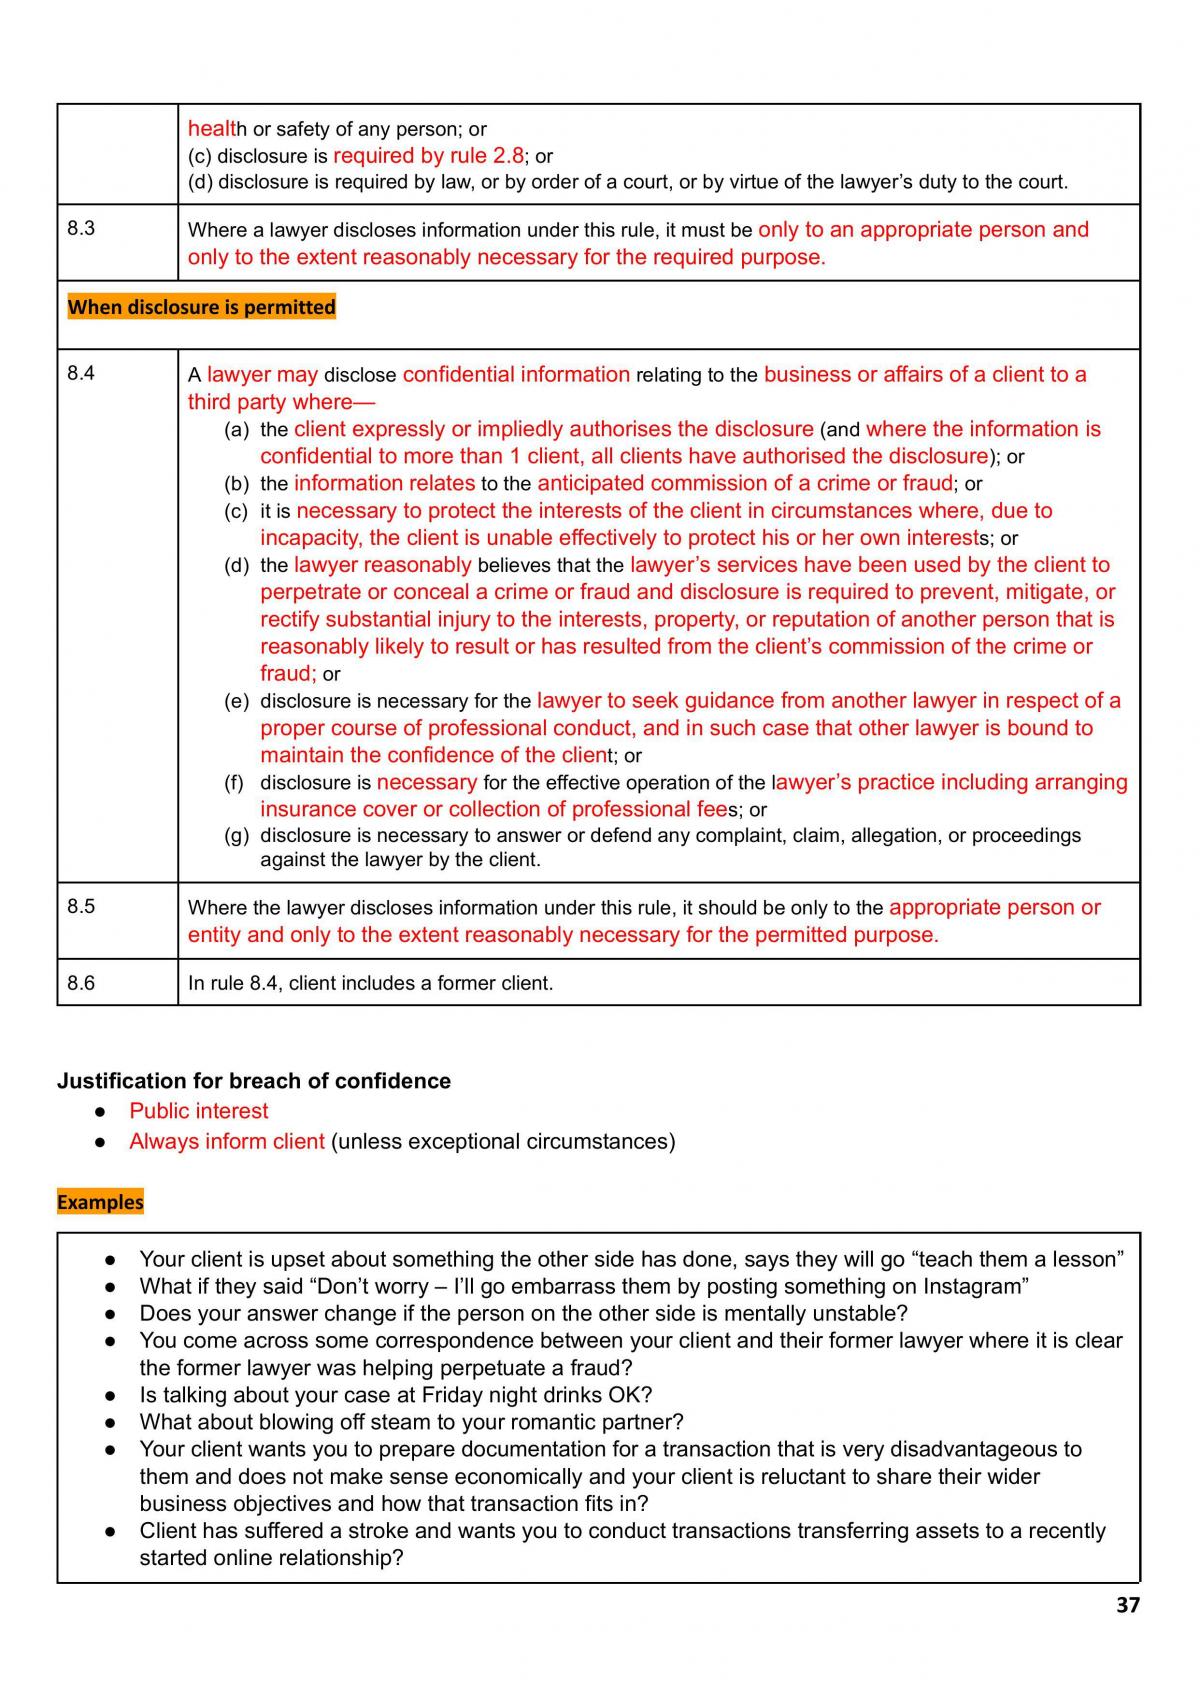 Legal Ethics full notes - Page 37